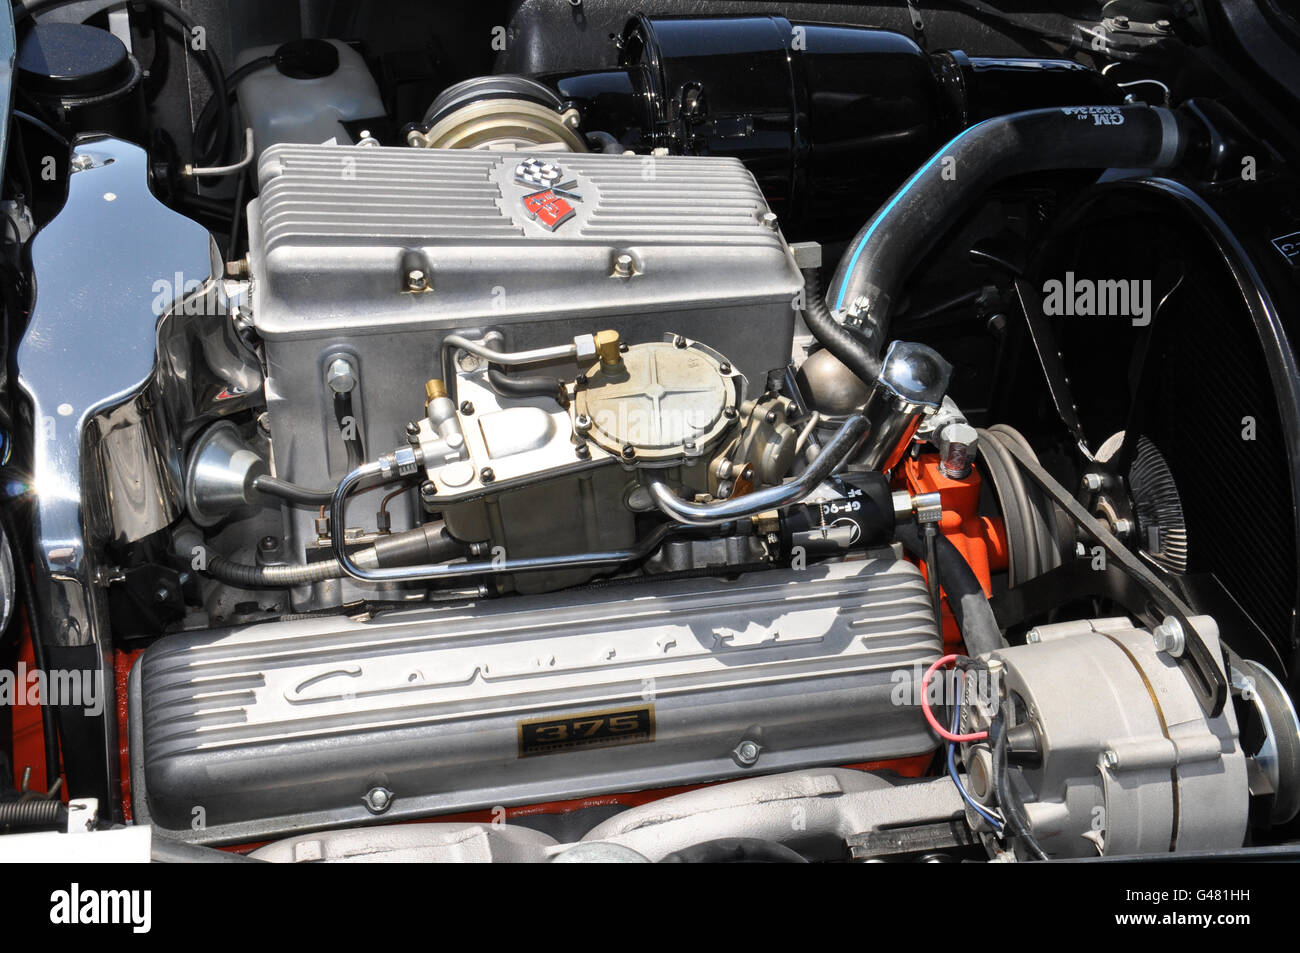 A vintage Fuel Injected Corvette Engine. Stock Photo